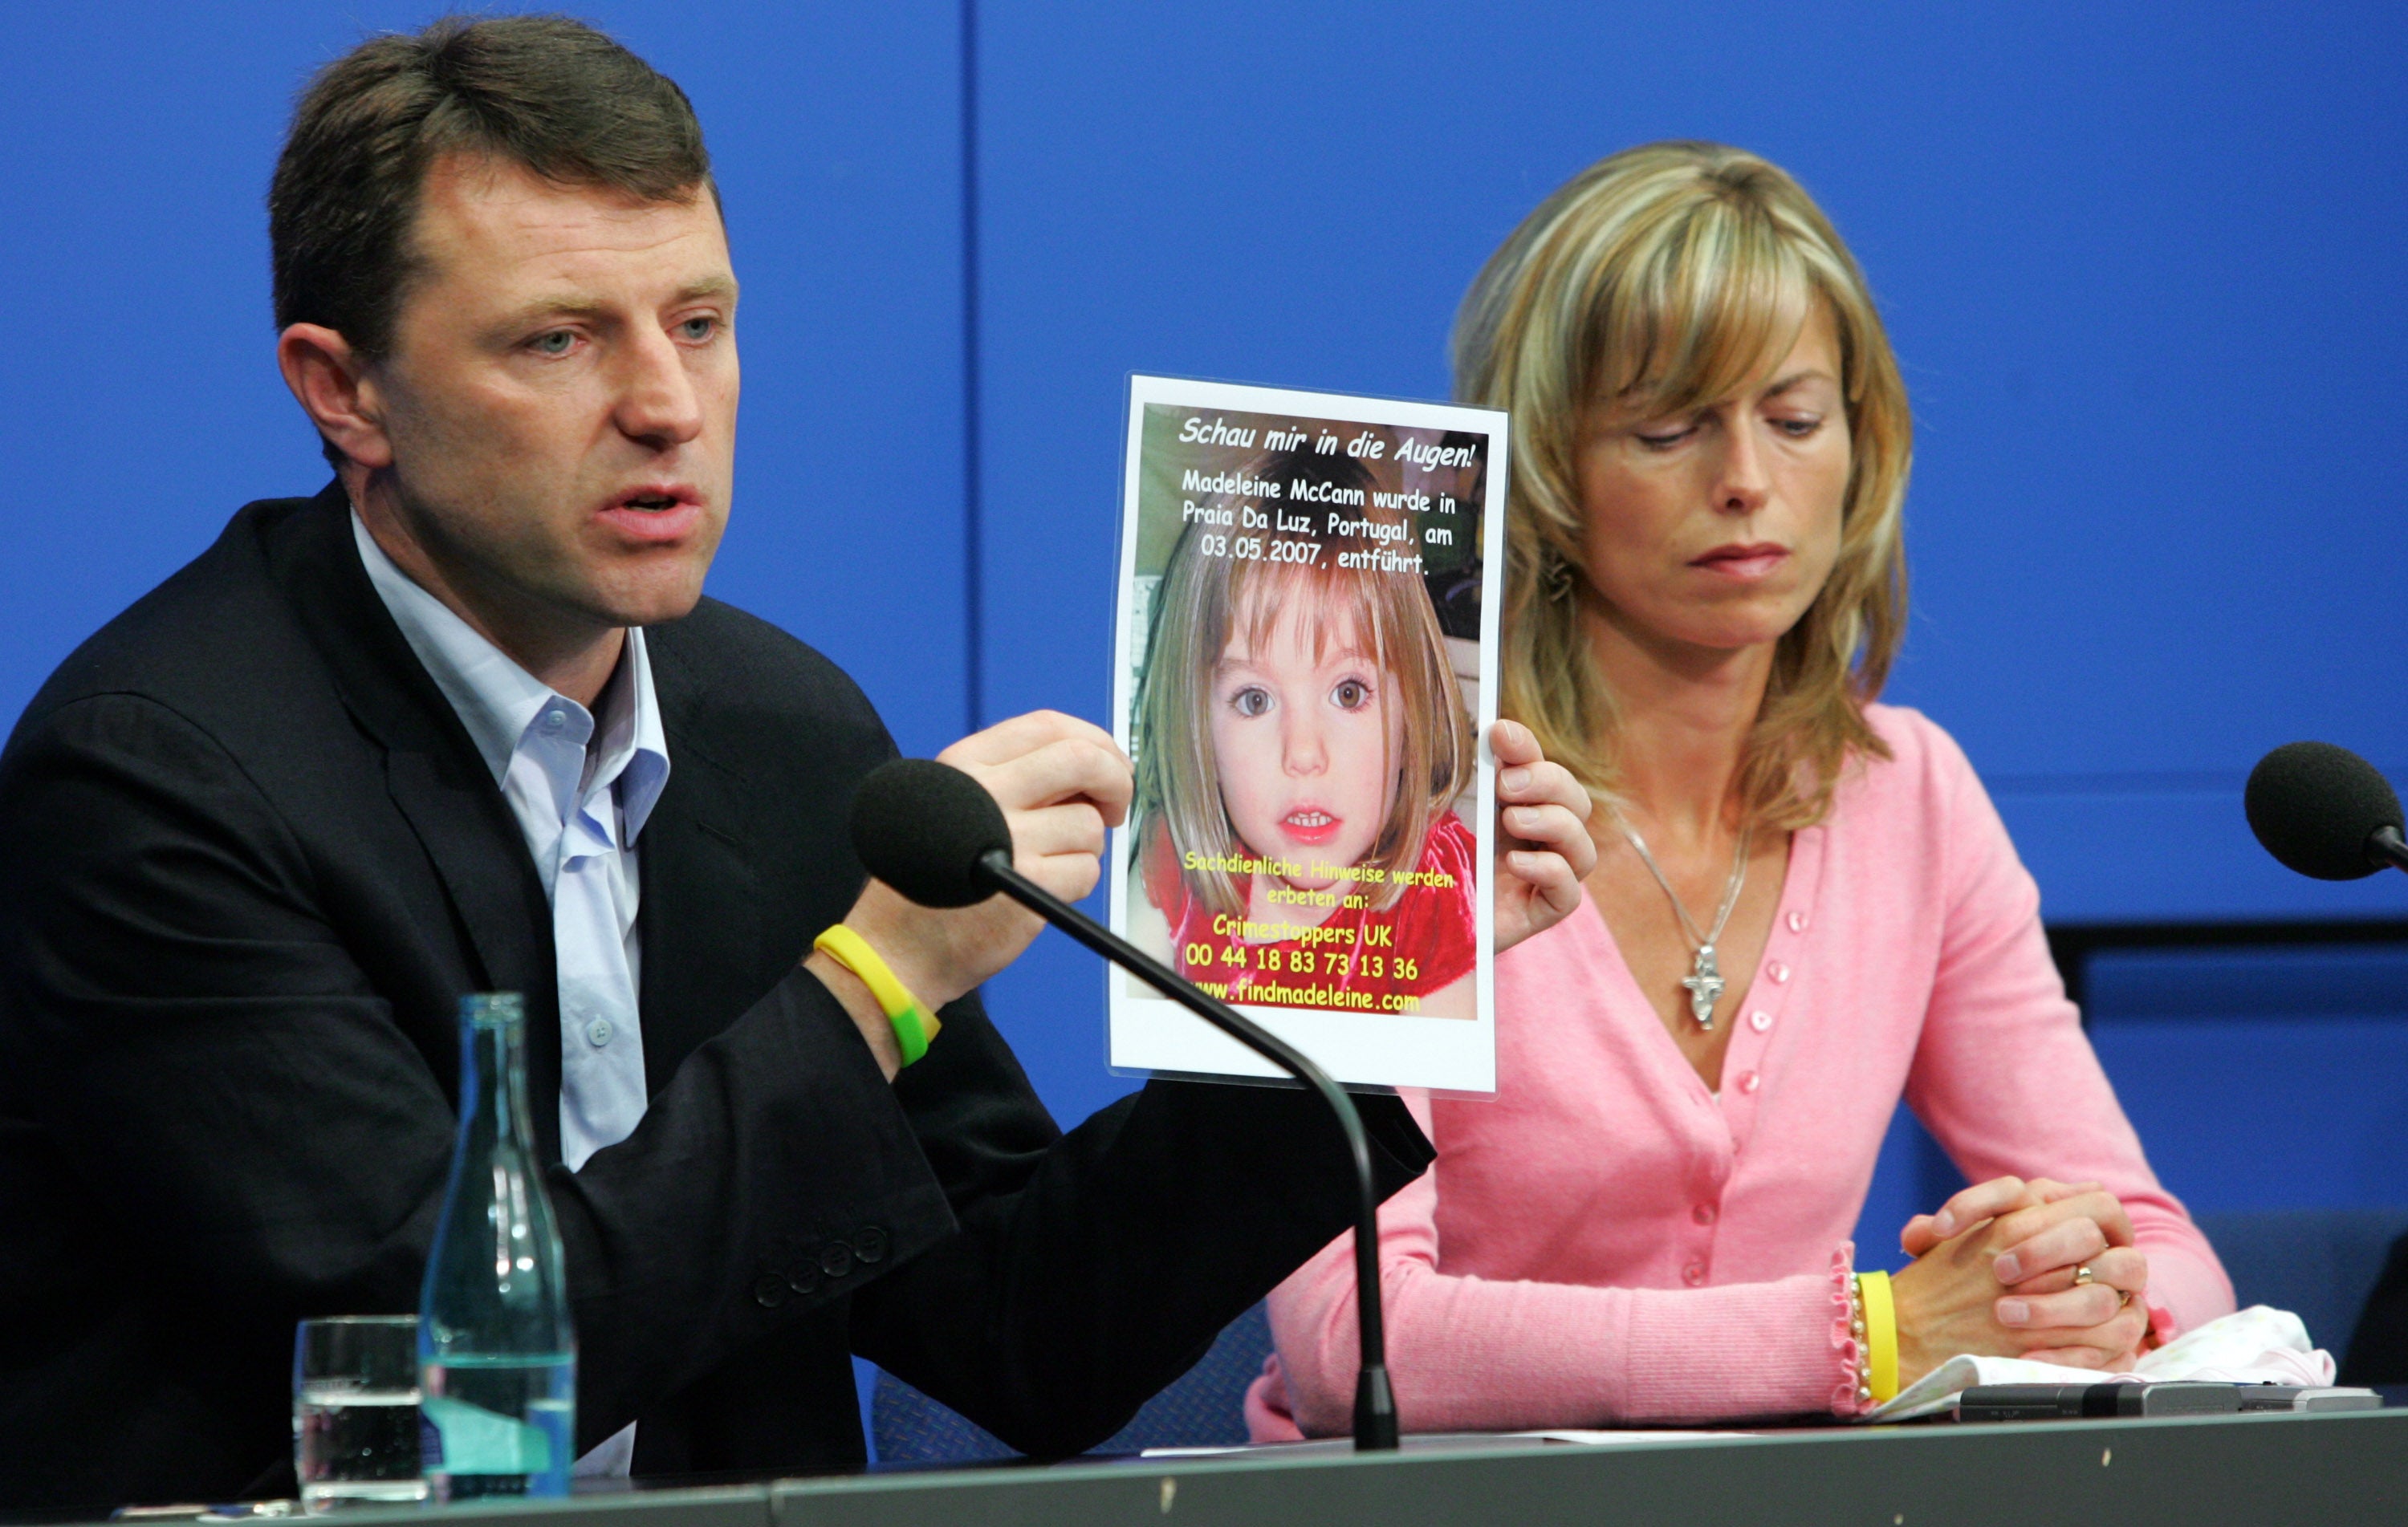 Madeleine McCann disappeared from a beach resort in Portugal in May 2007